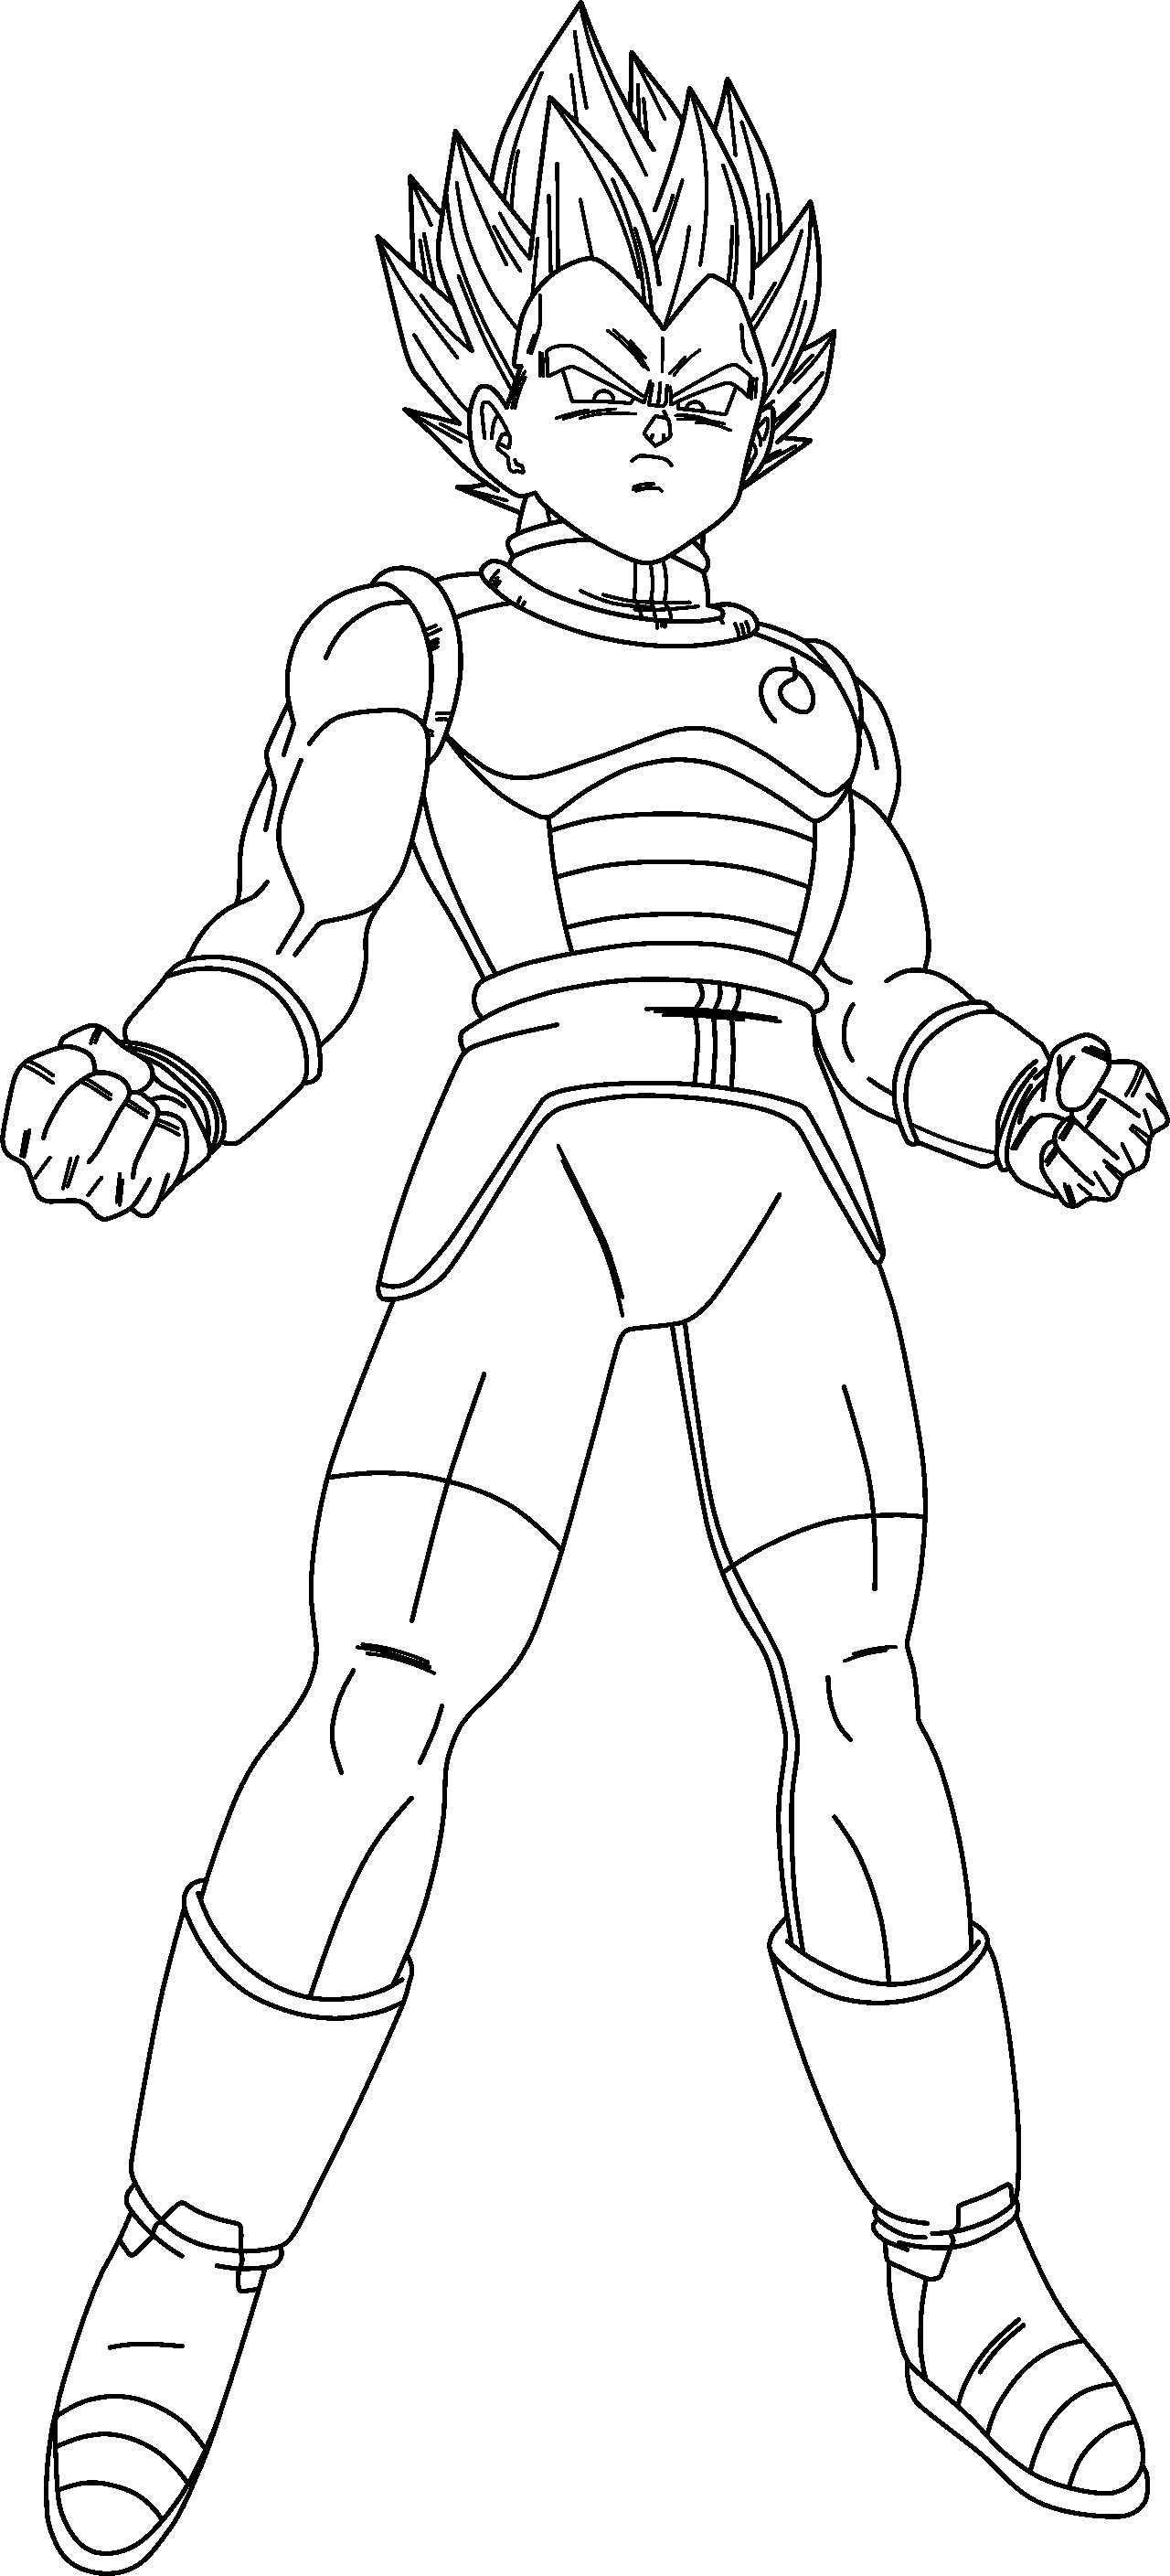 Goku And Vegeta Coloring Pages - Coloring Home